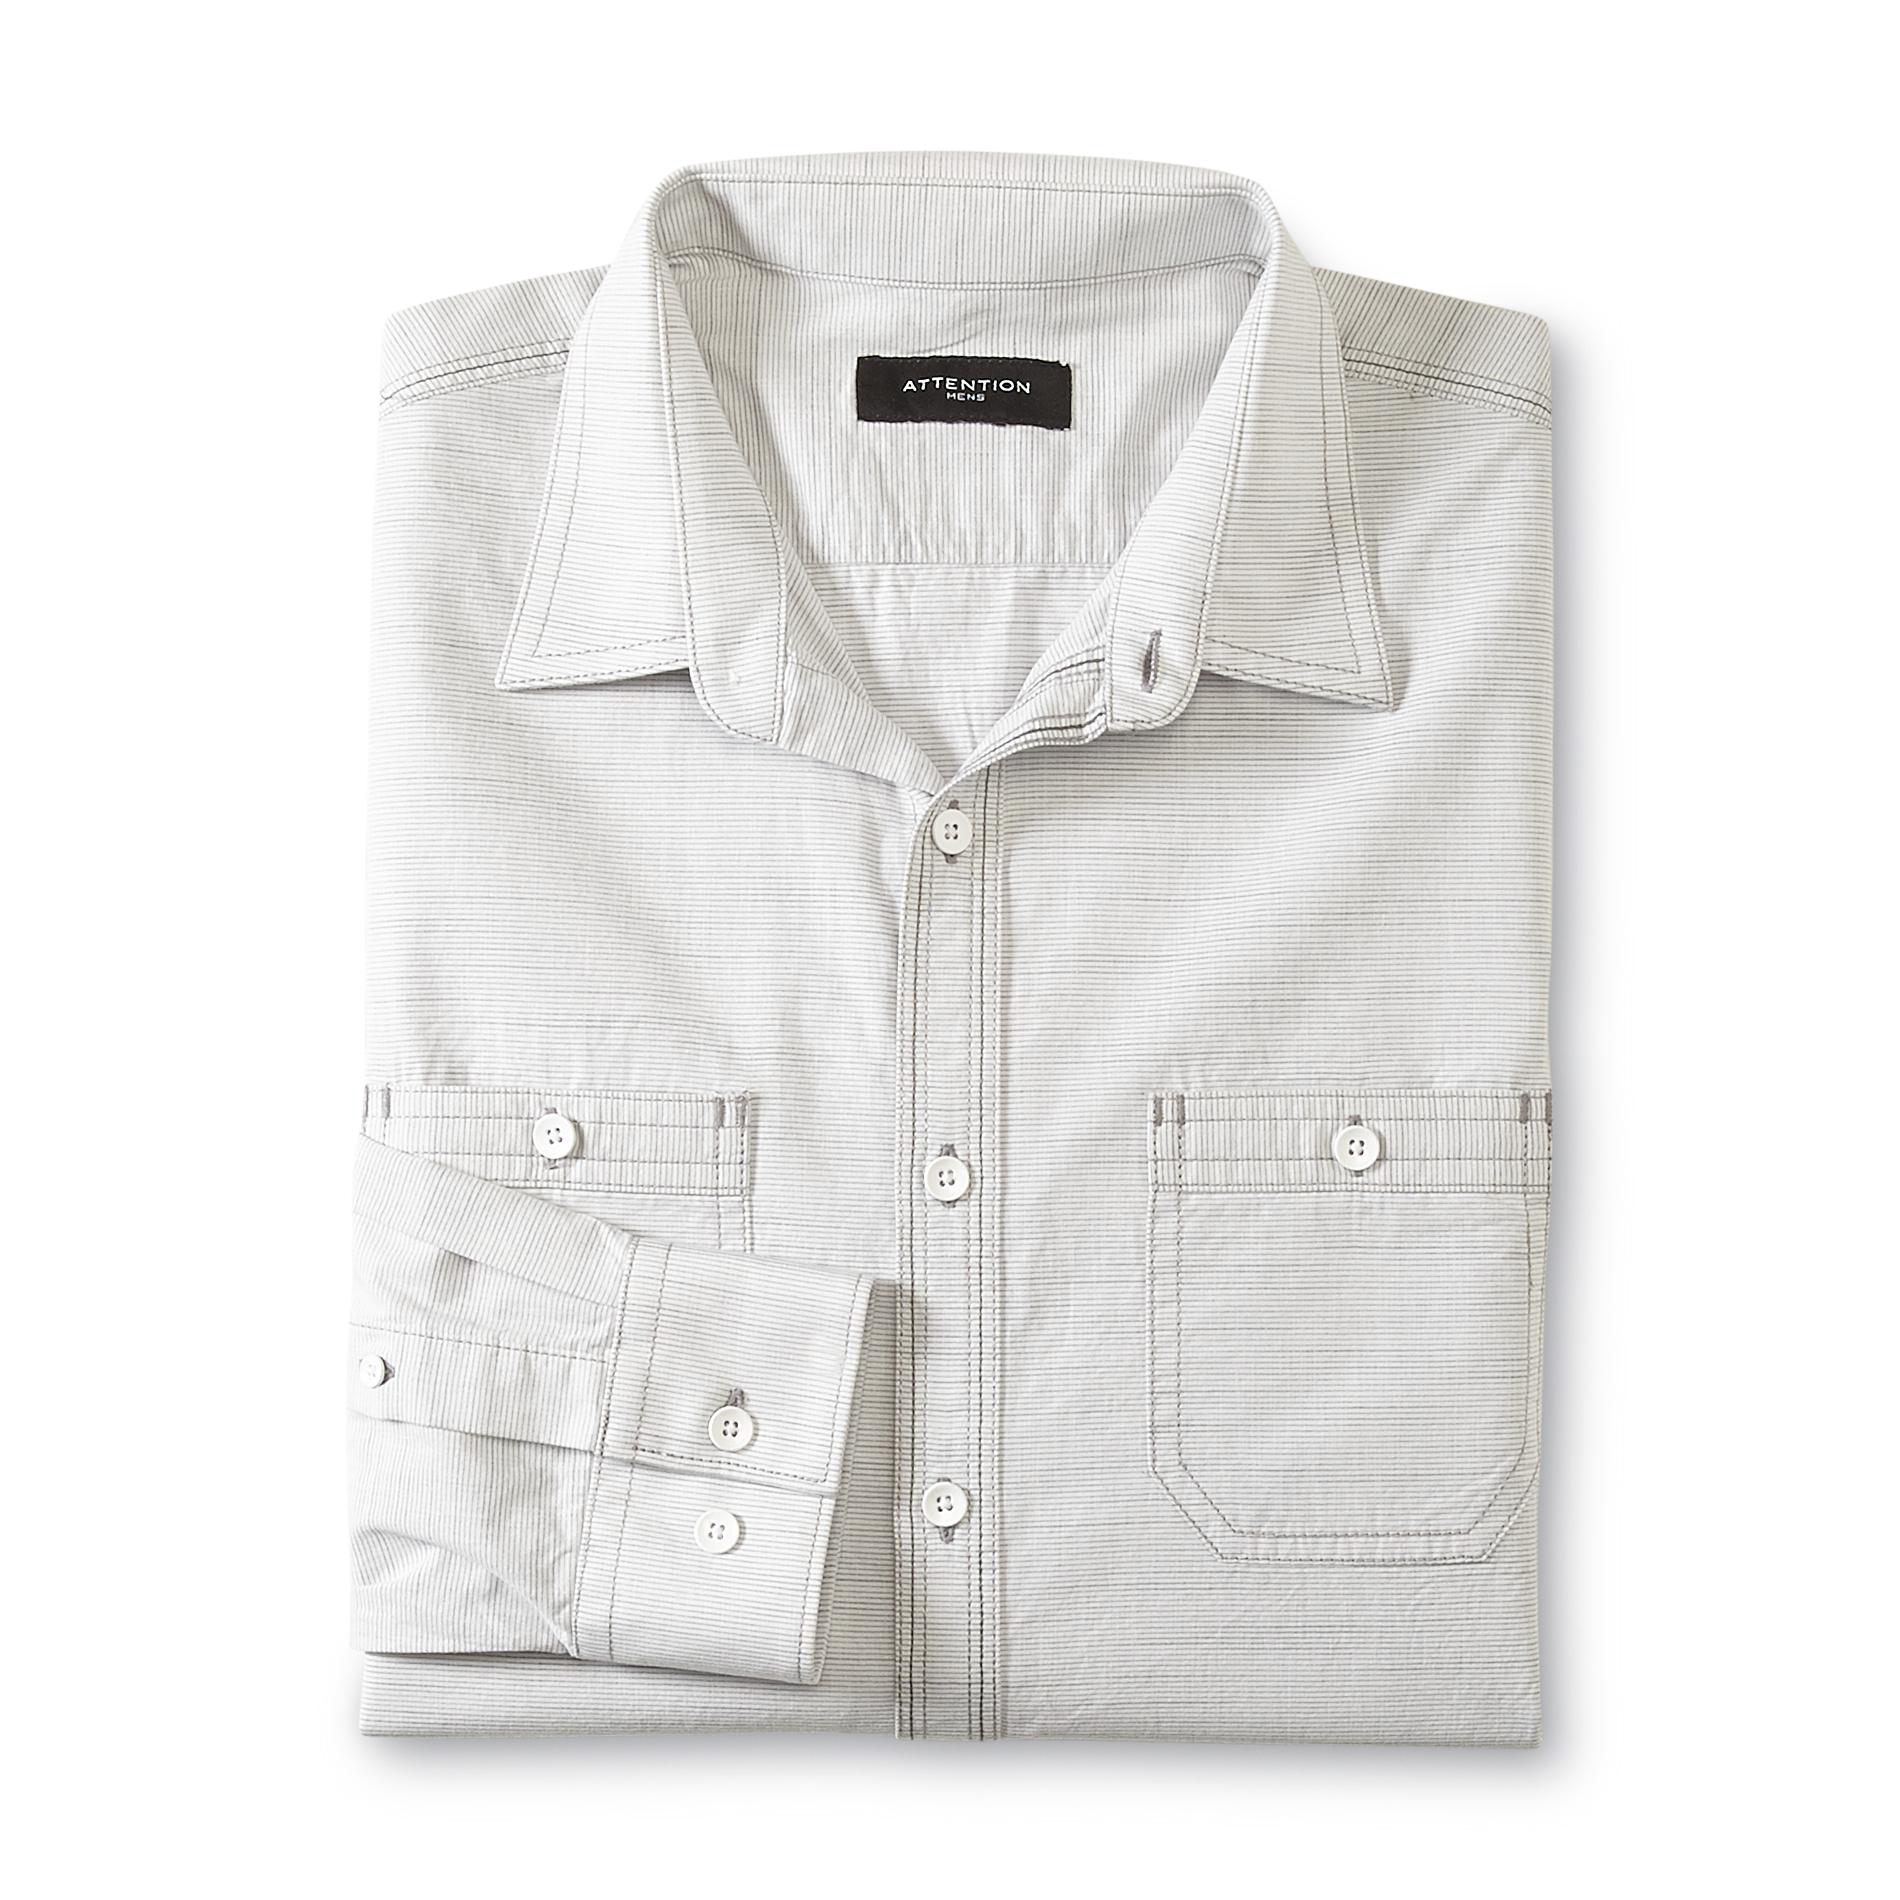 Attention Men's Casual Button-Front Shirt - Striped